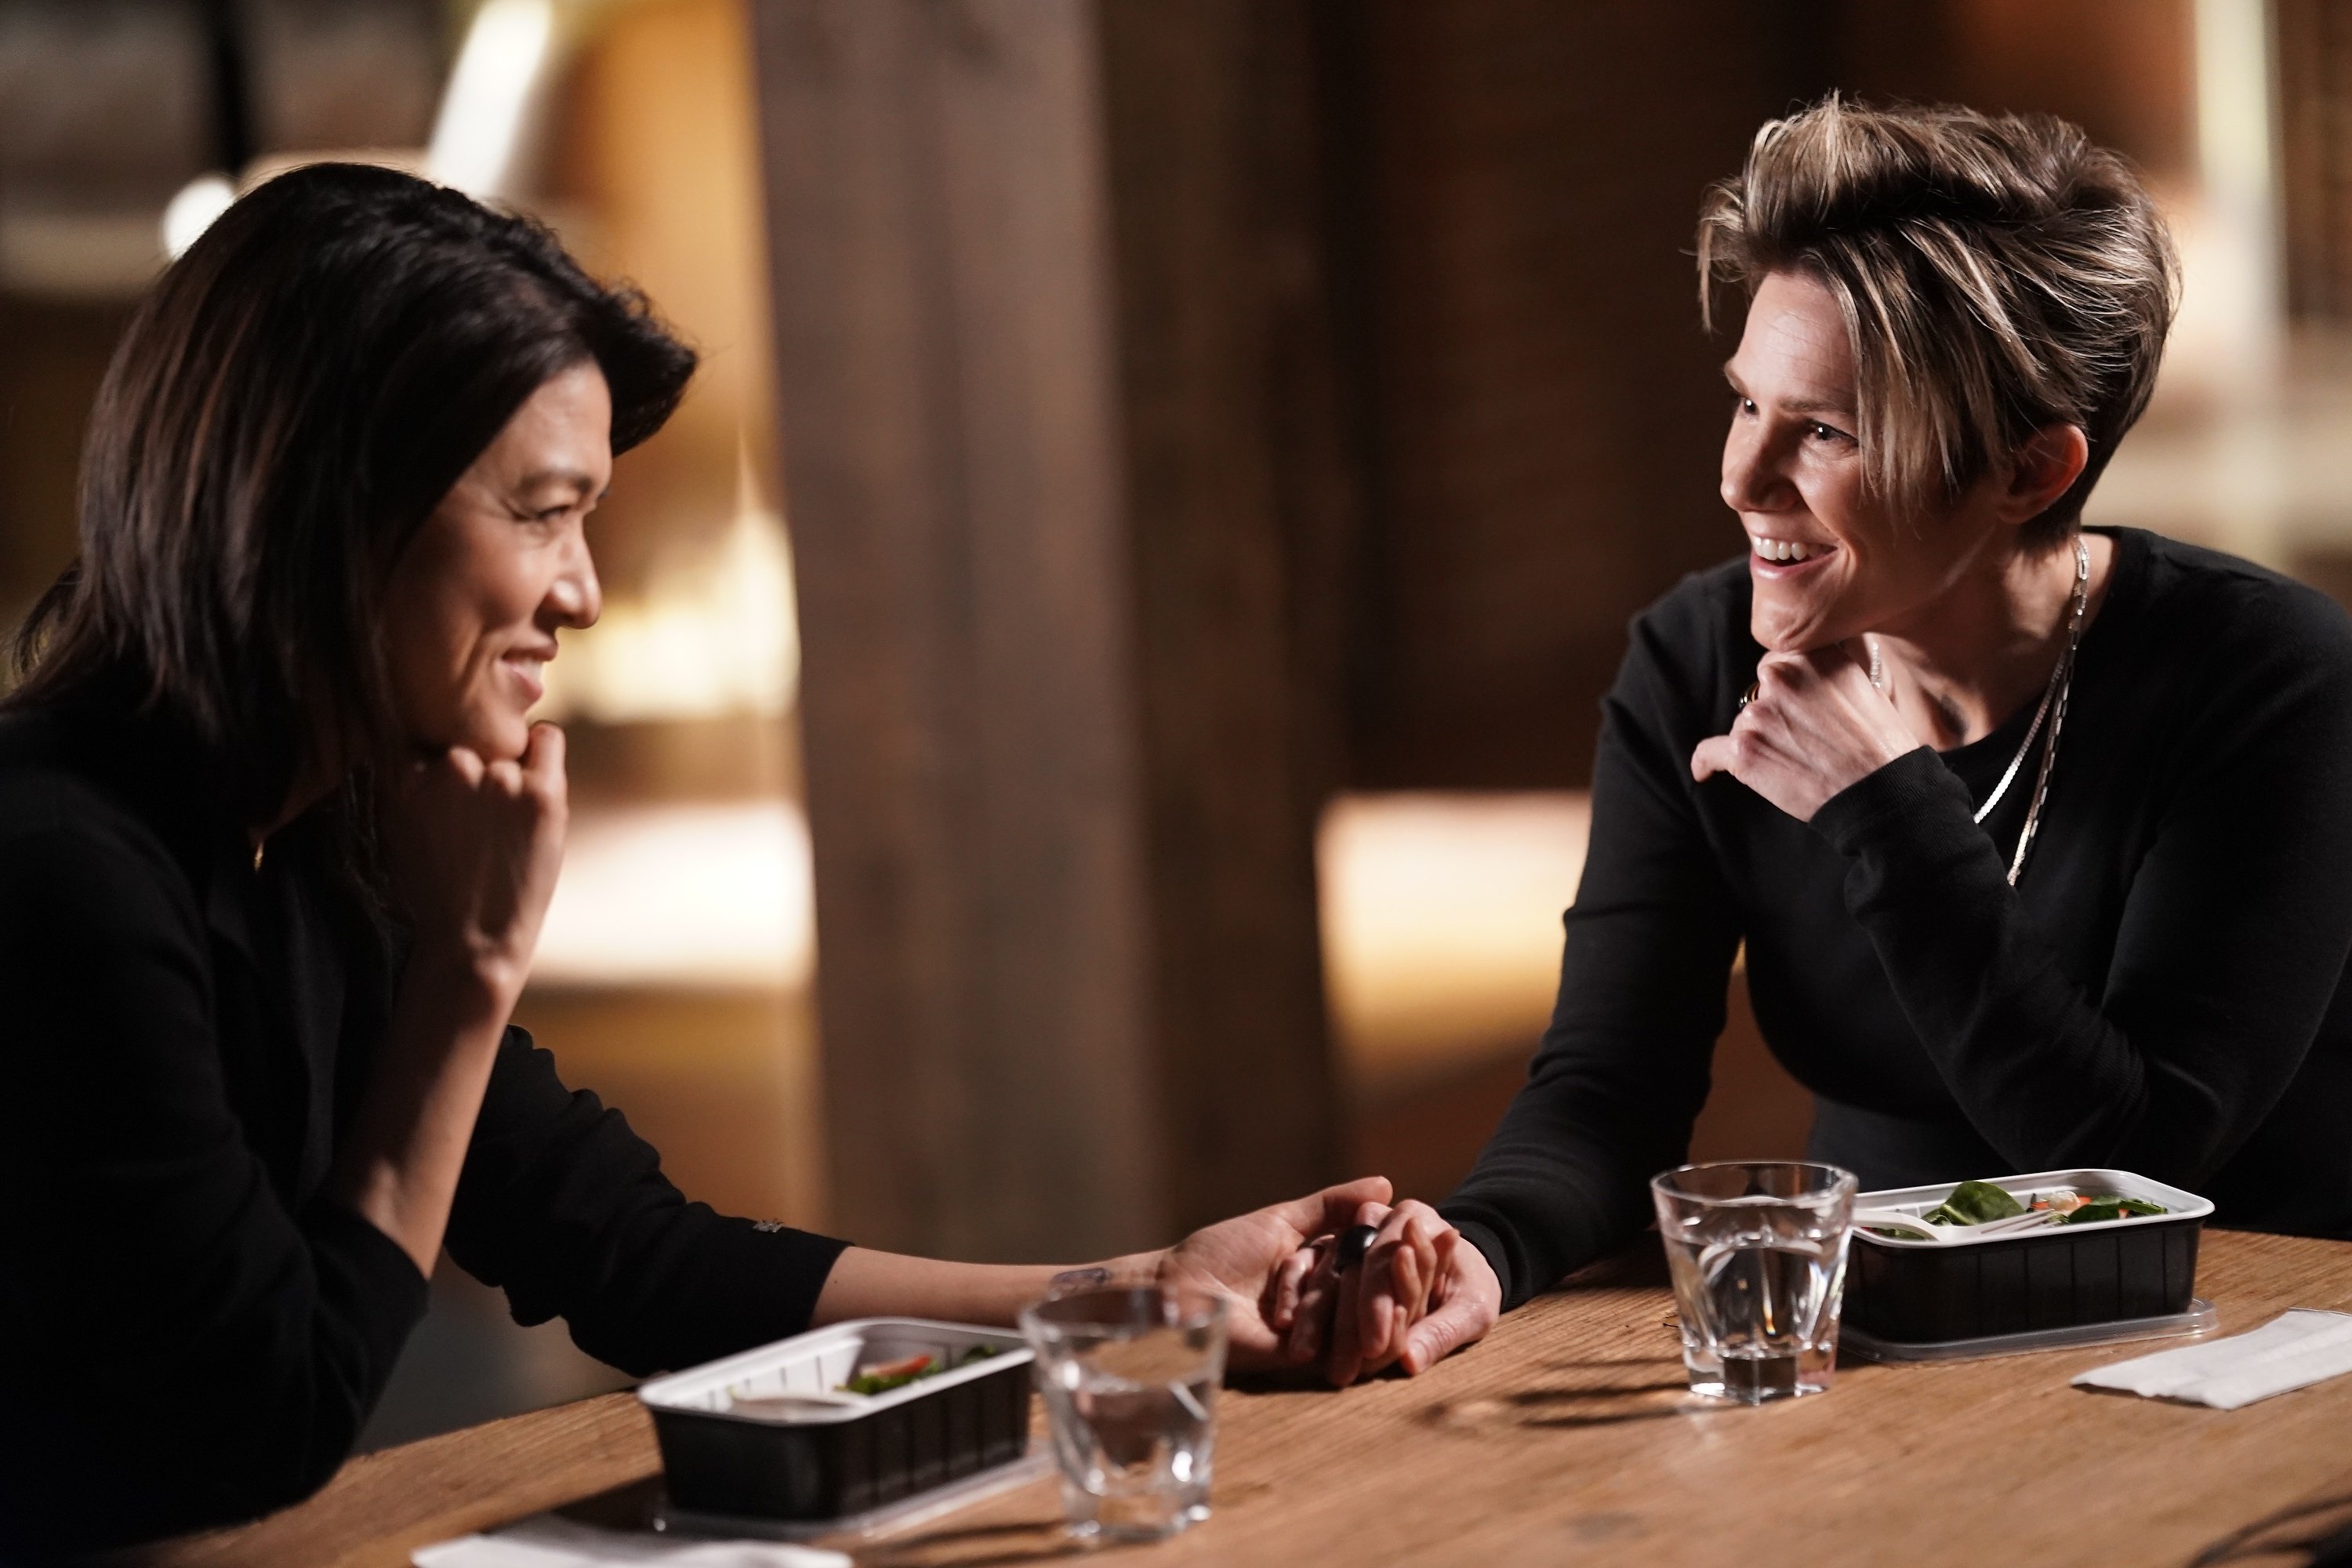 'A Million Little Things' Grace Park and Cameron Esposito talk together over dinner as Katherine and Greta